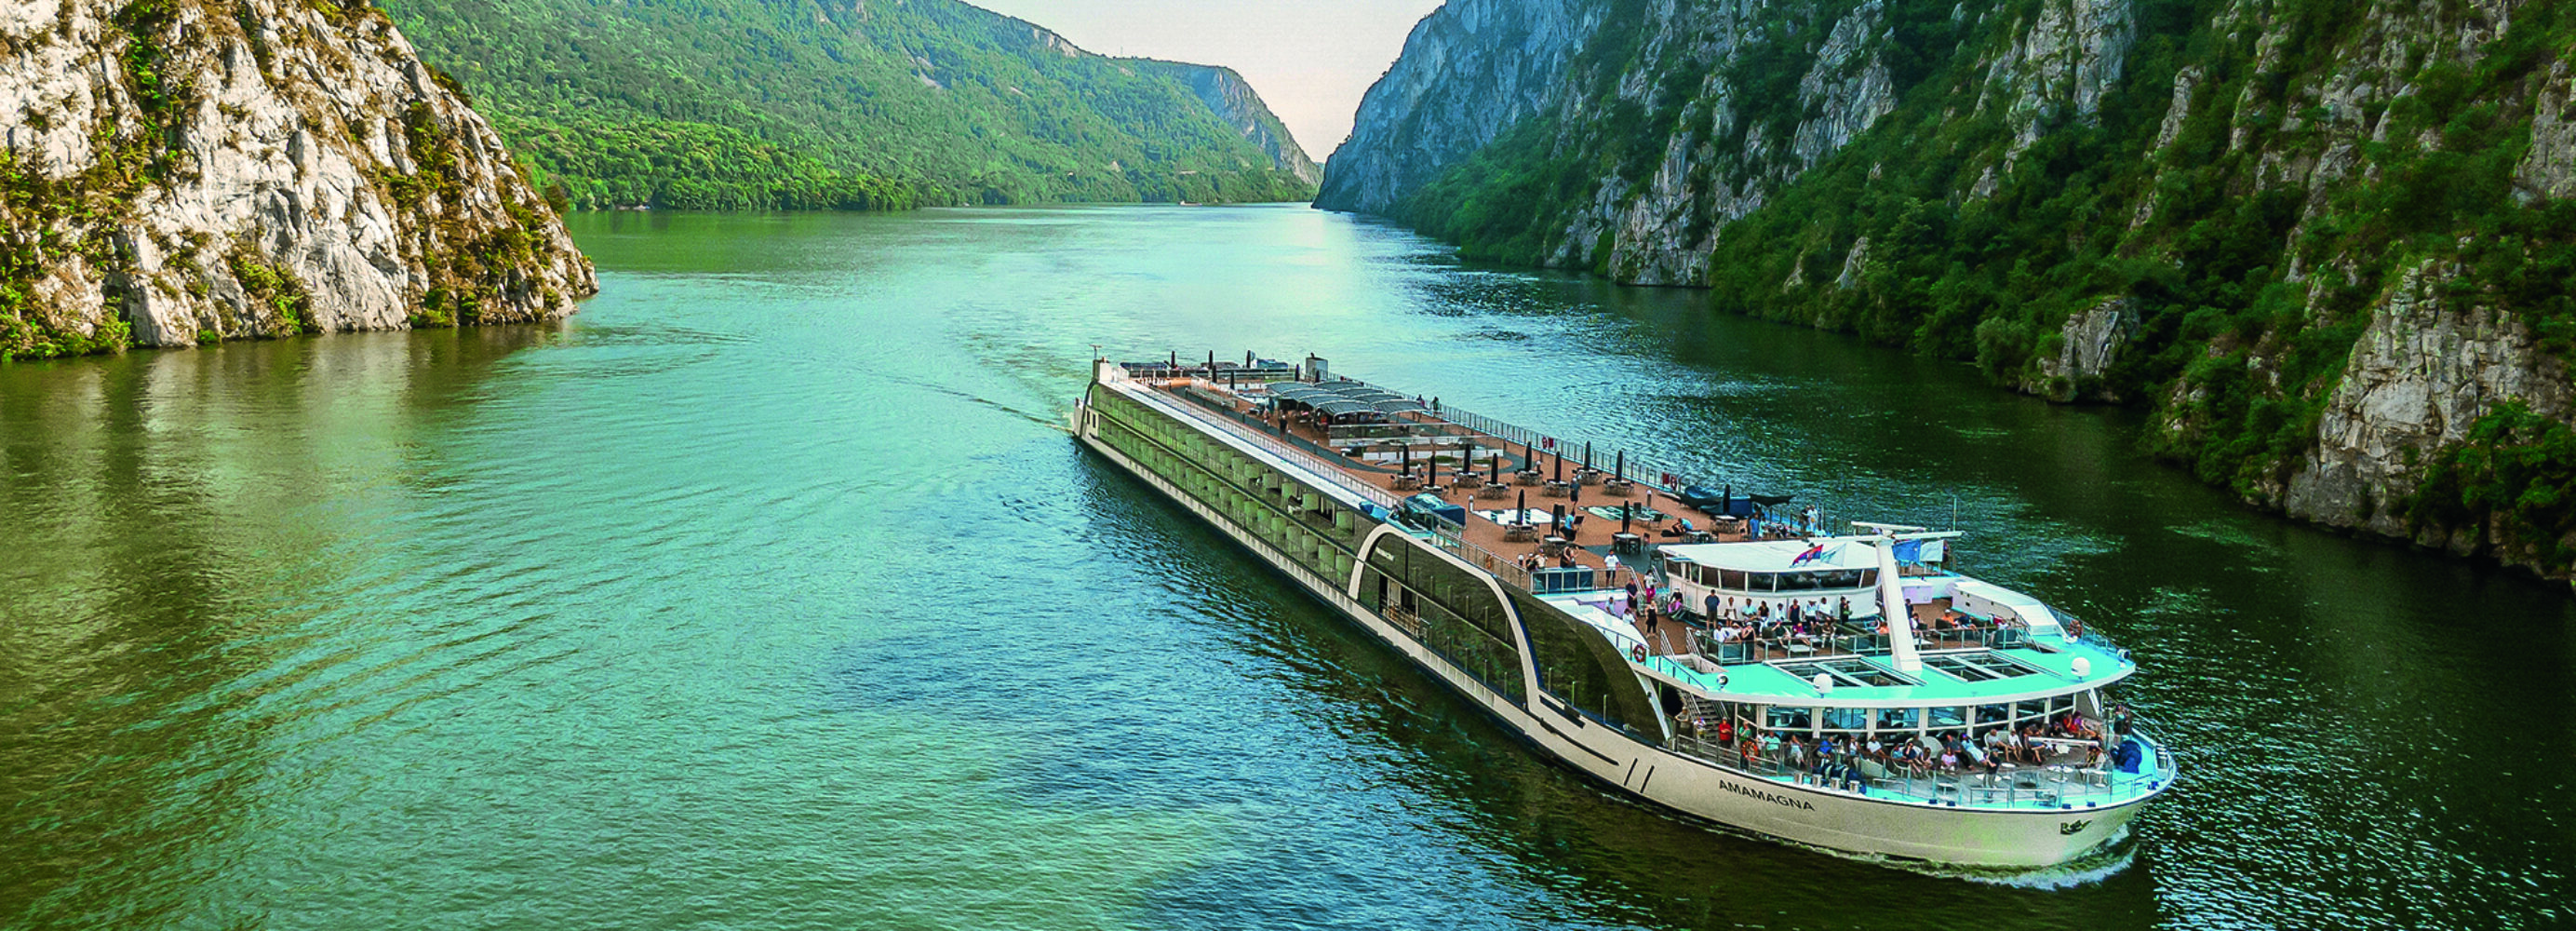 An exterior view of AmaMagna sailing through a gorge. It is twice the width of almost every other river ship in Europe.